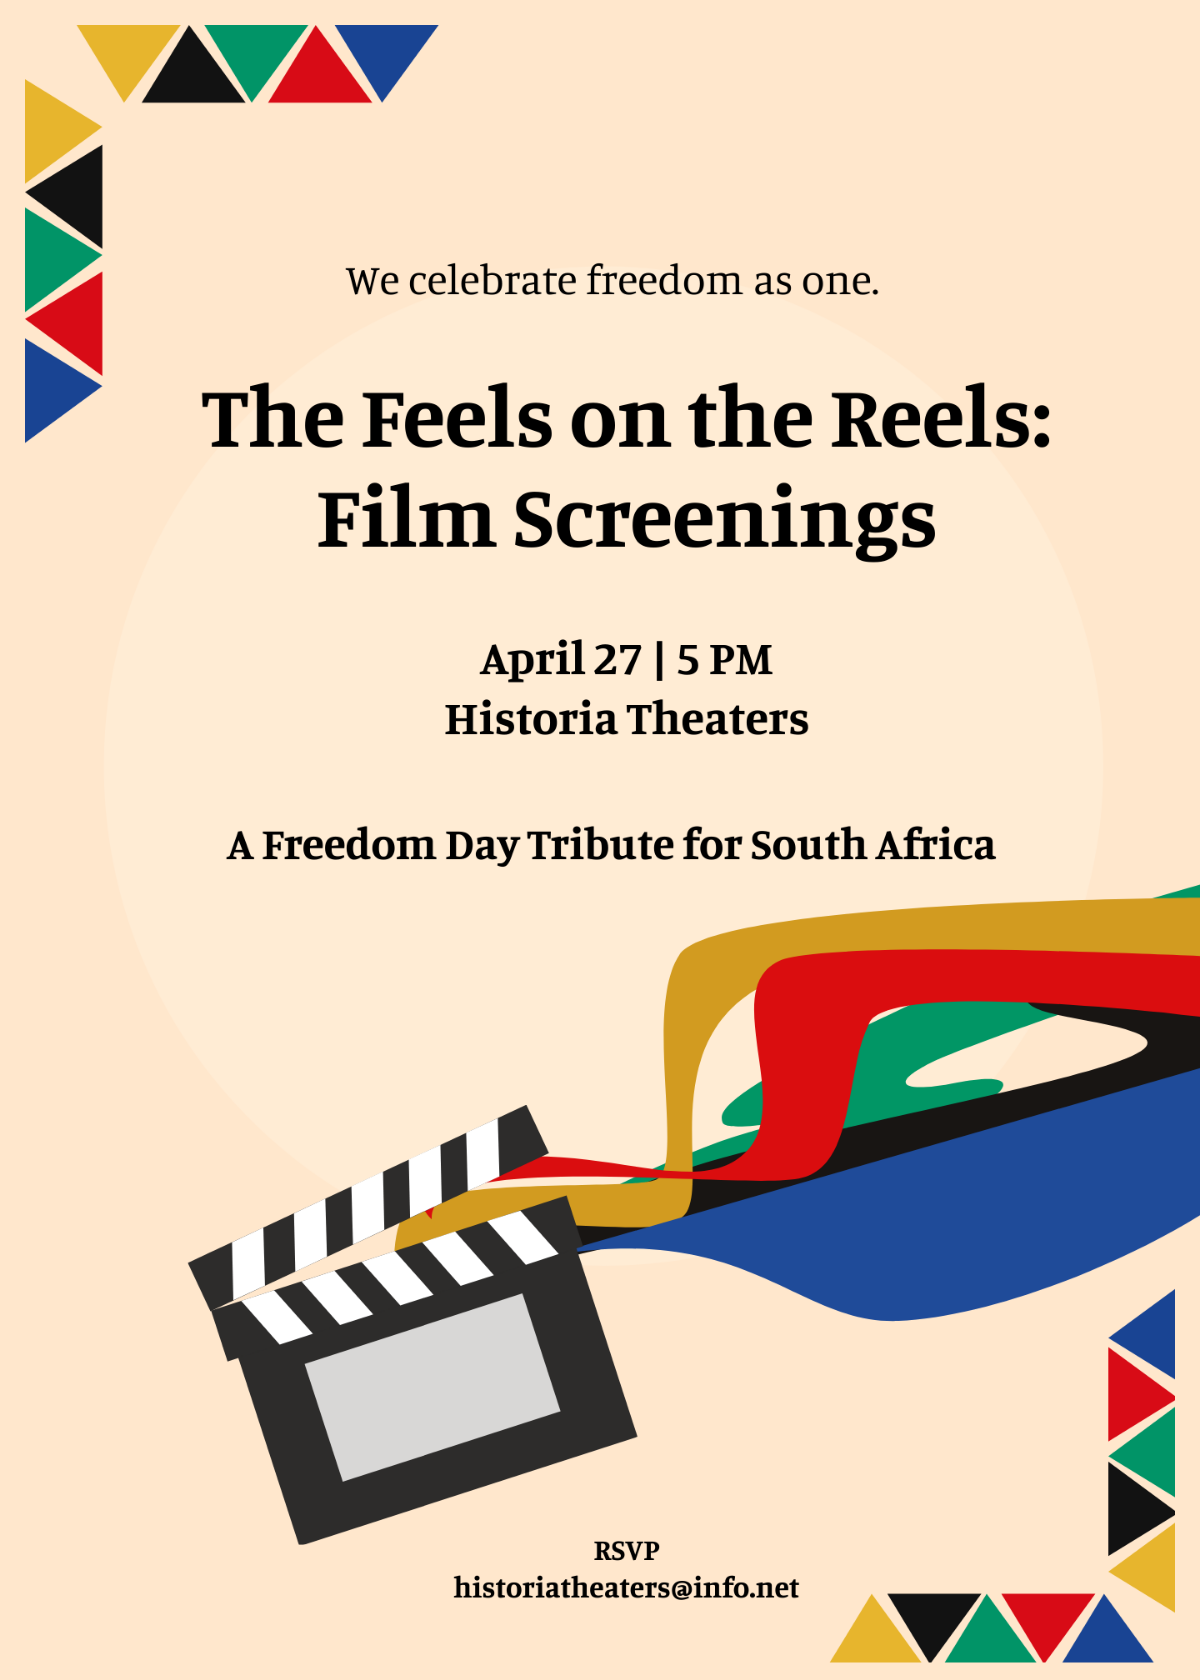 South Africa Freedom Day Invitation